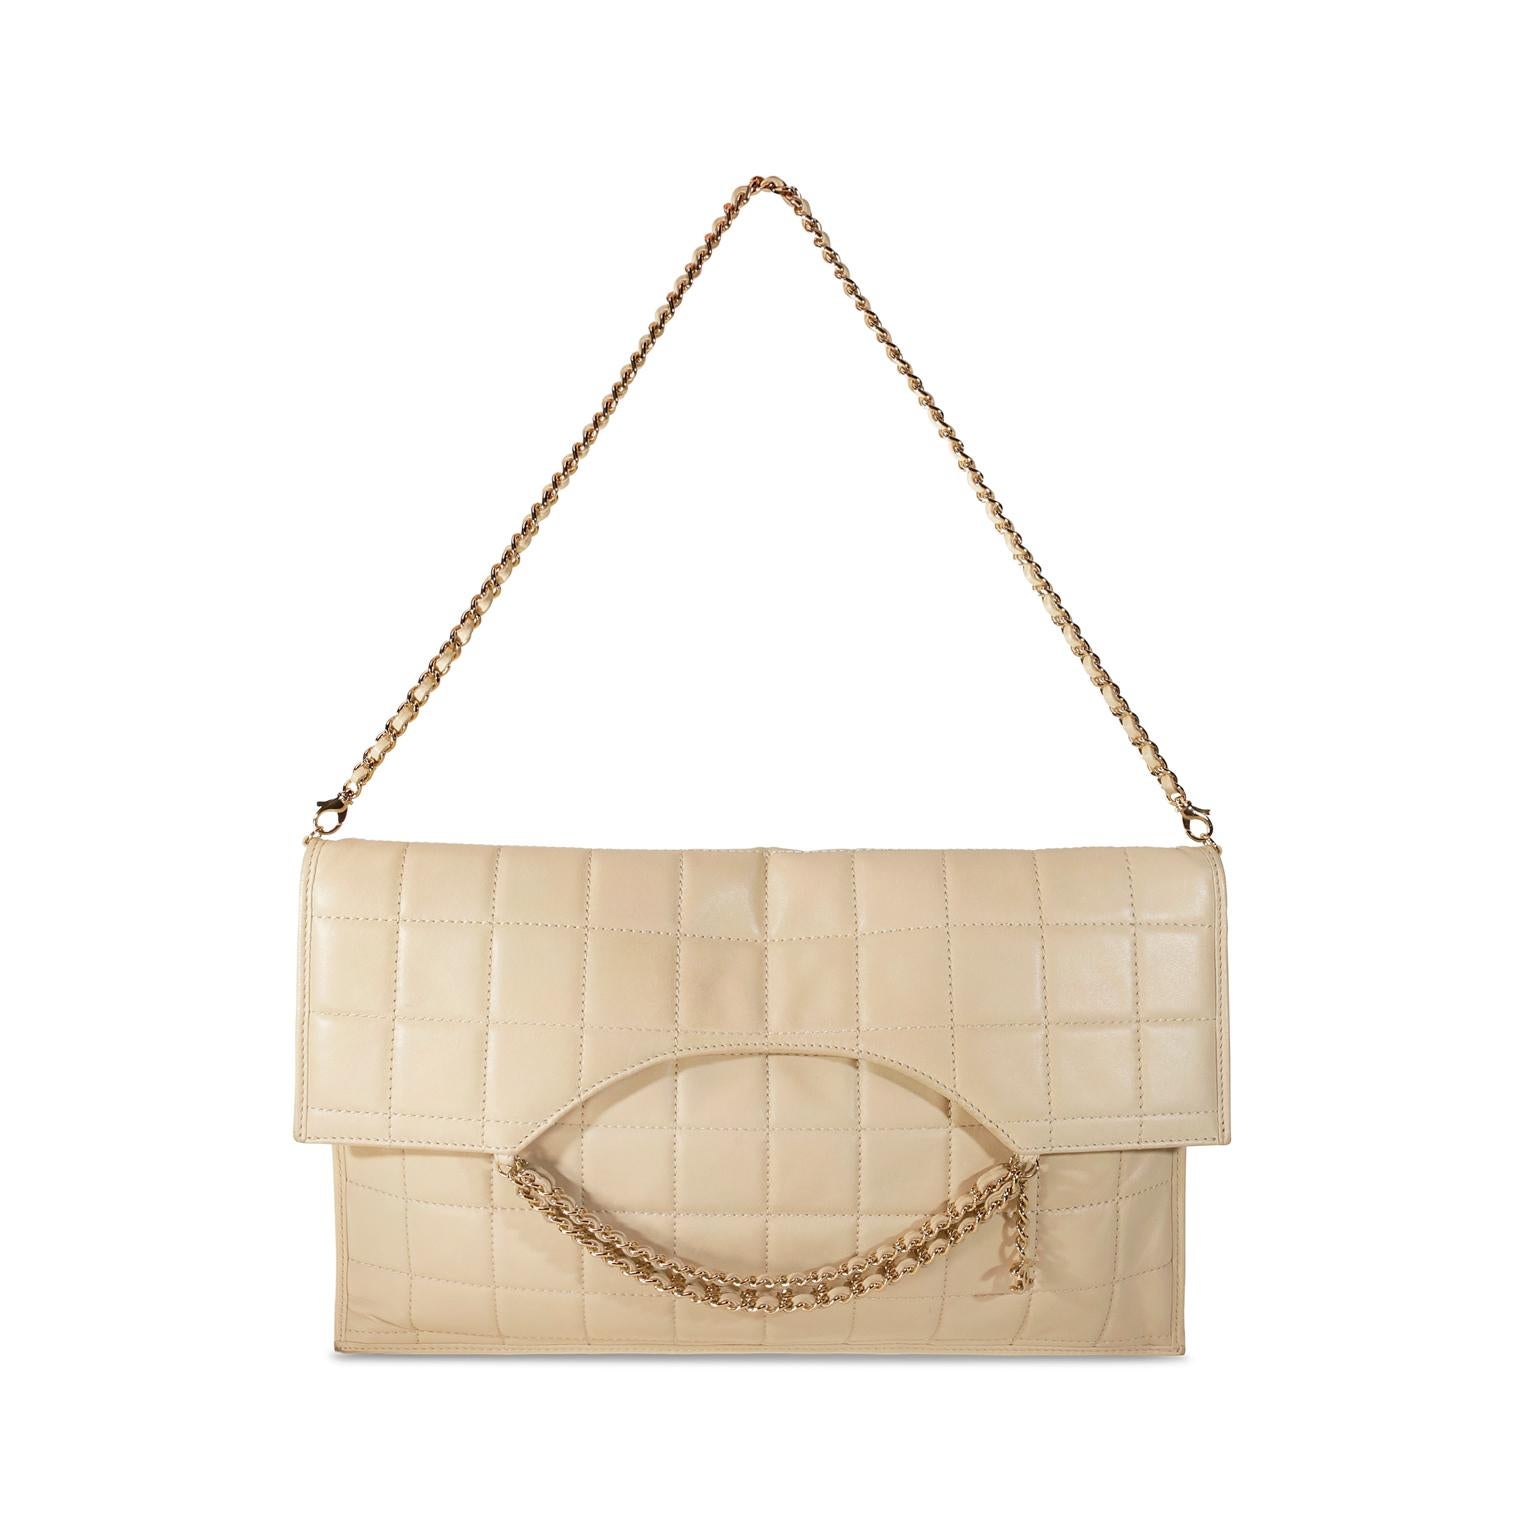 Chanel Beige Leather Multi Chain Convertible Envelope Clutch 8